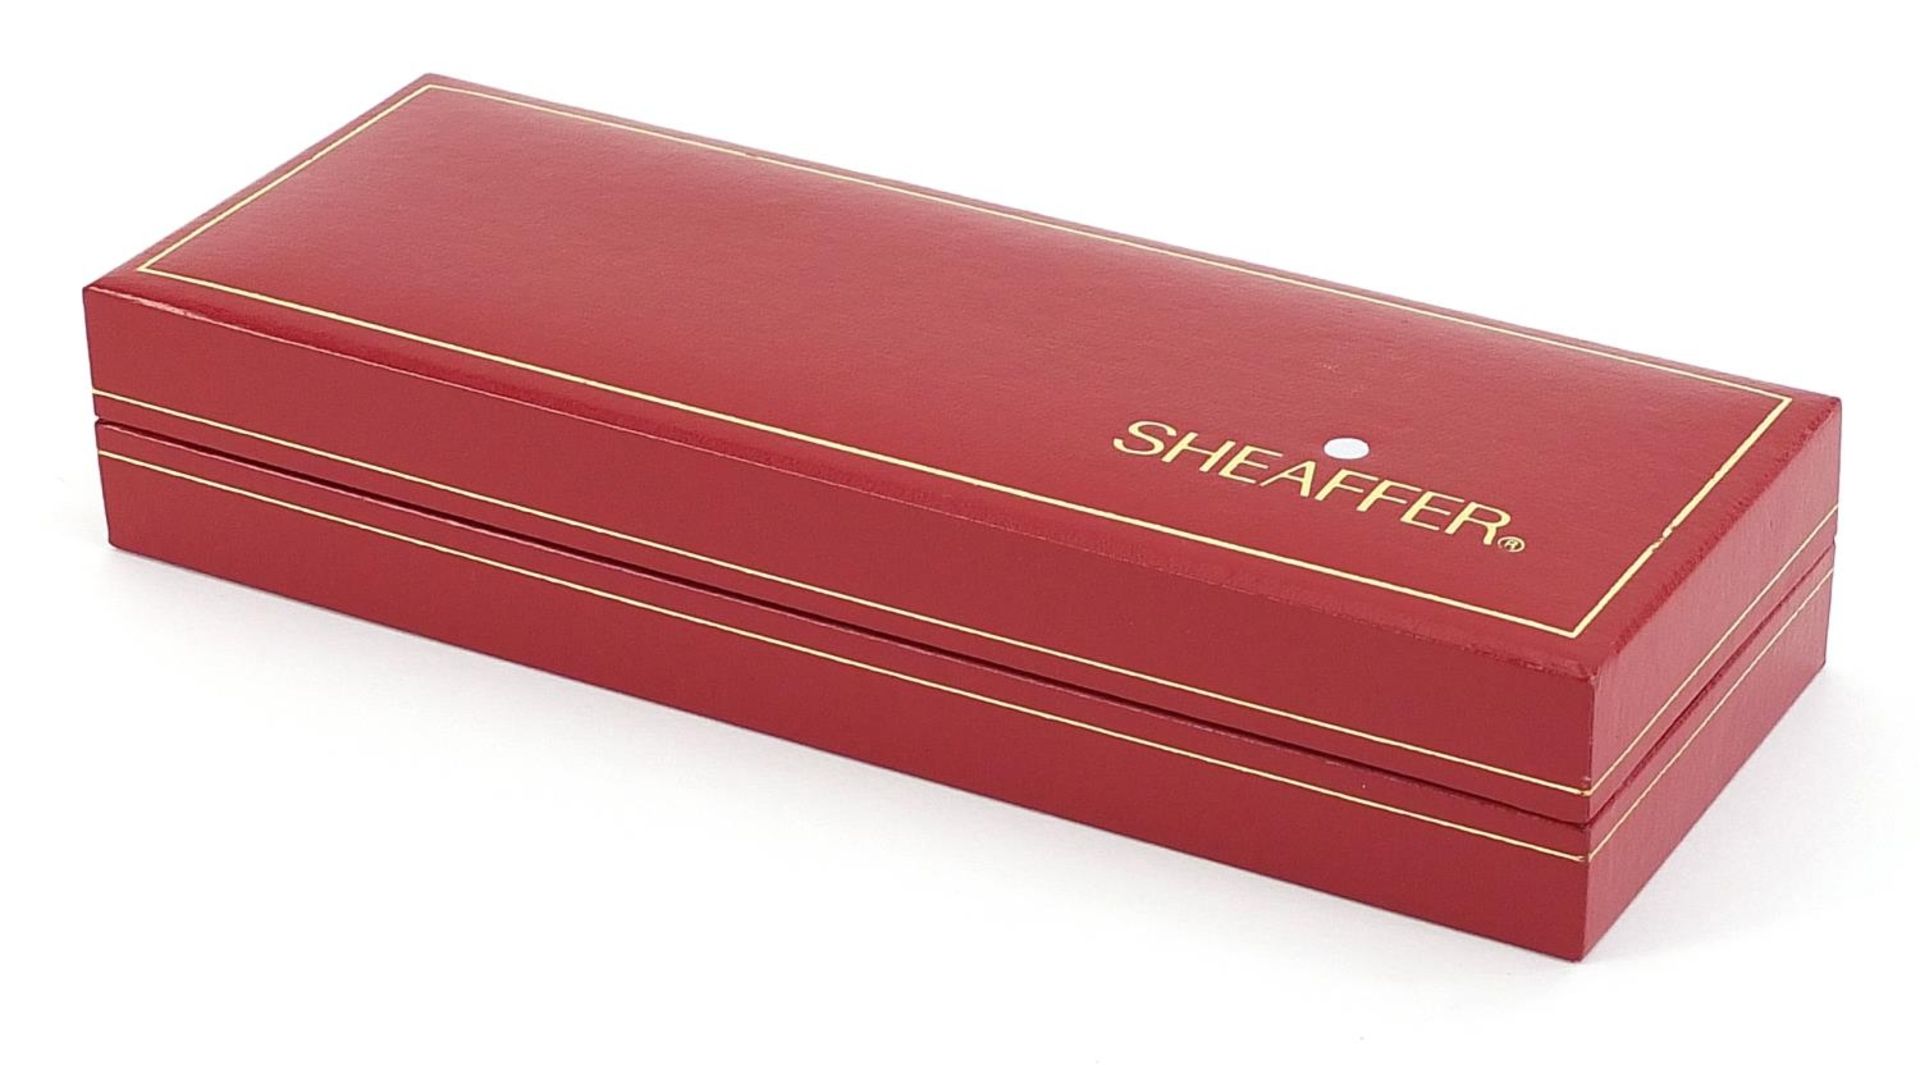 Sheaffer ballpoint pen with case, the case 18cm wide - Image 5 of 5